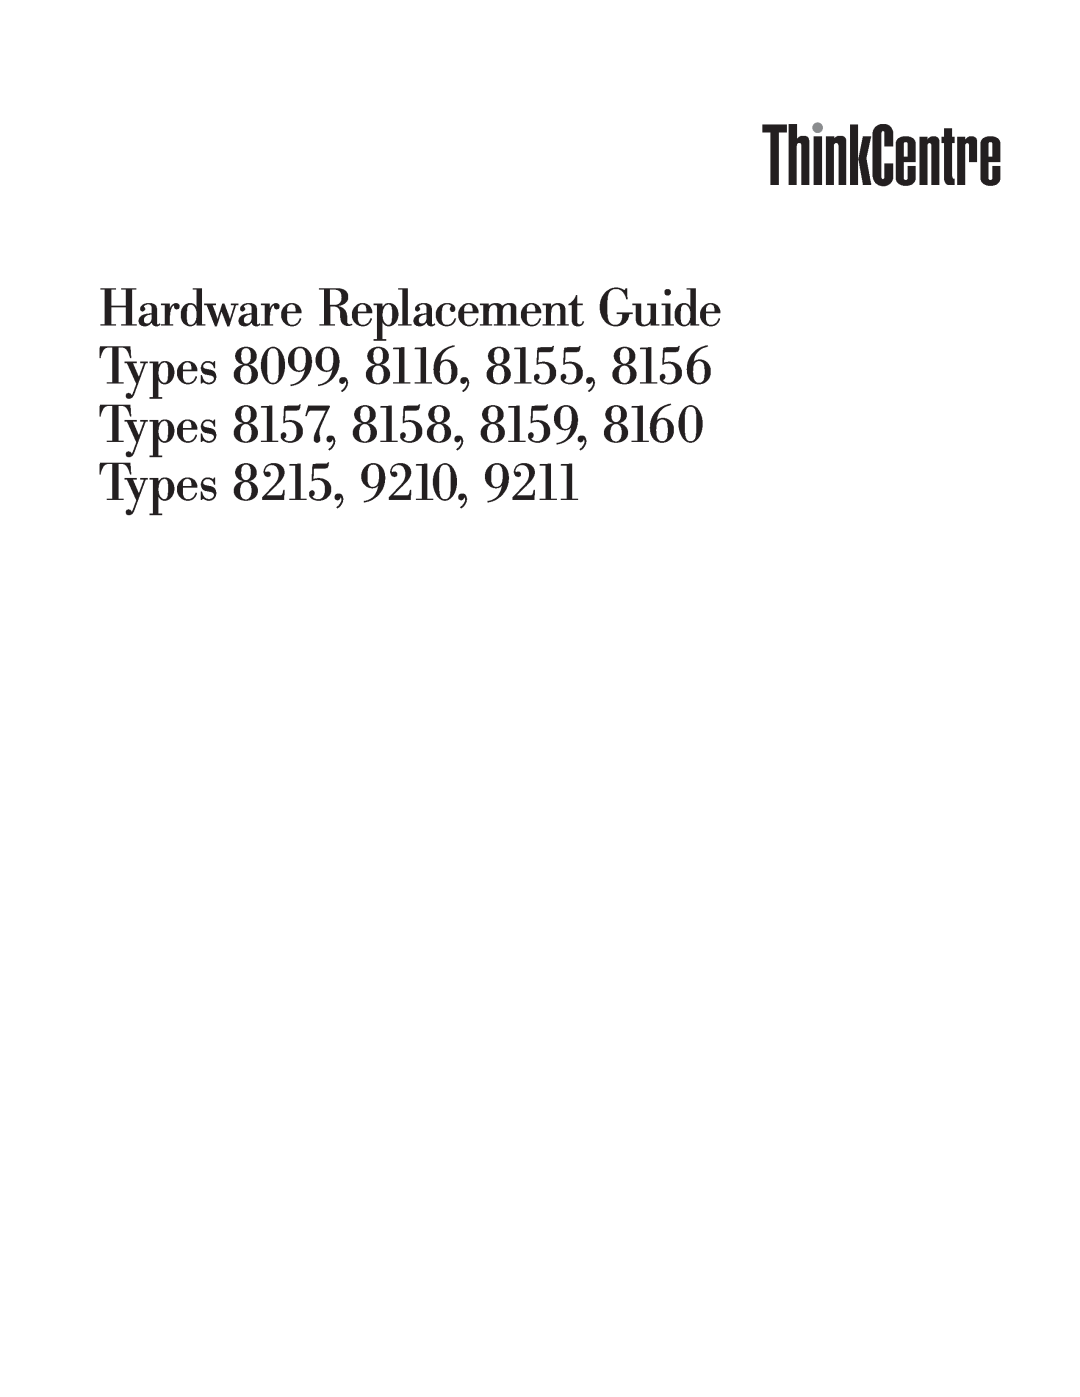 Lenovo 8160 manual Hardware Replacement Guide, Types 8099, 8116, 8155, Types 8157, 8158, 8159, Types 8215, 9210 